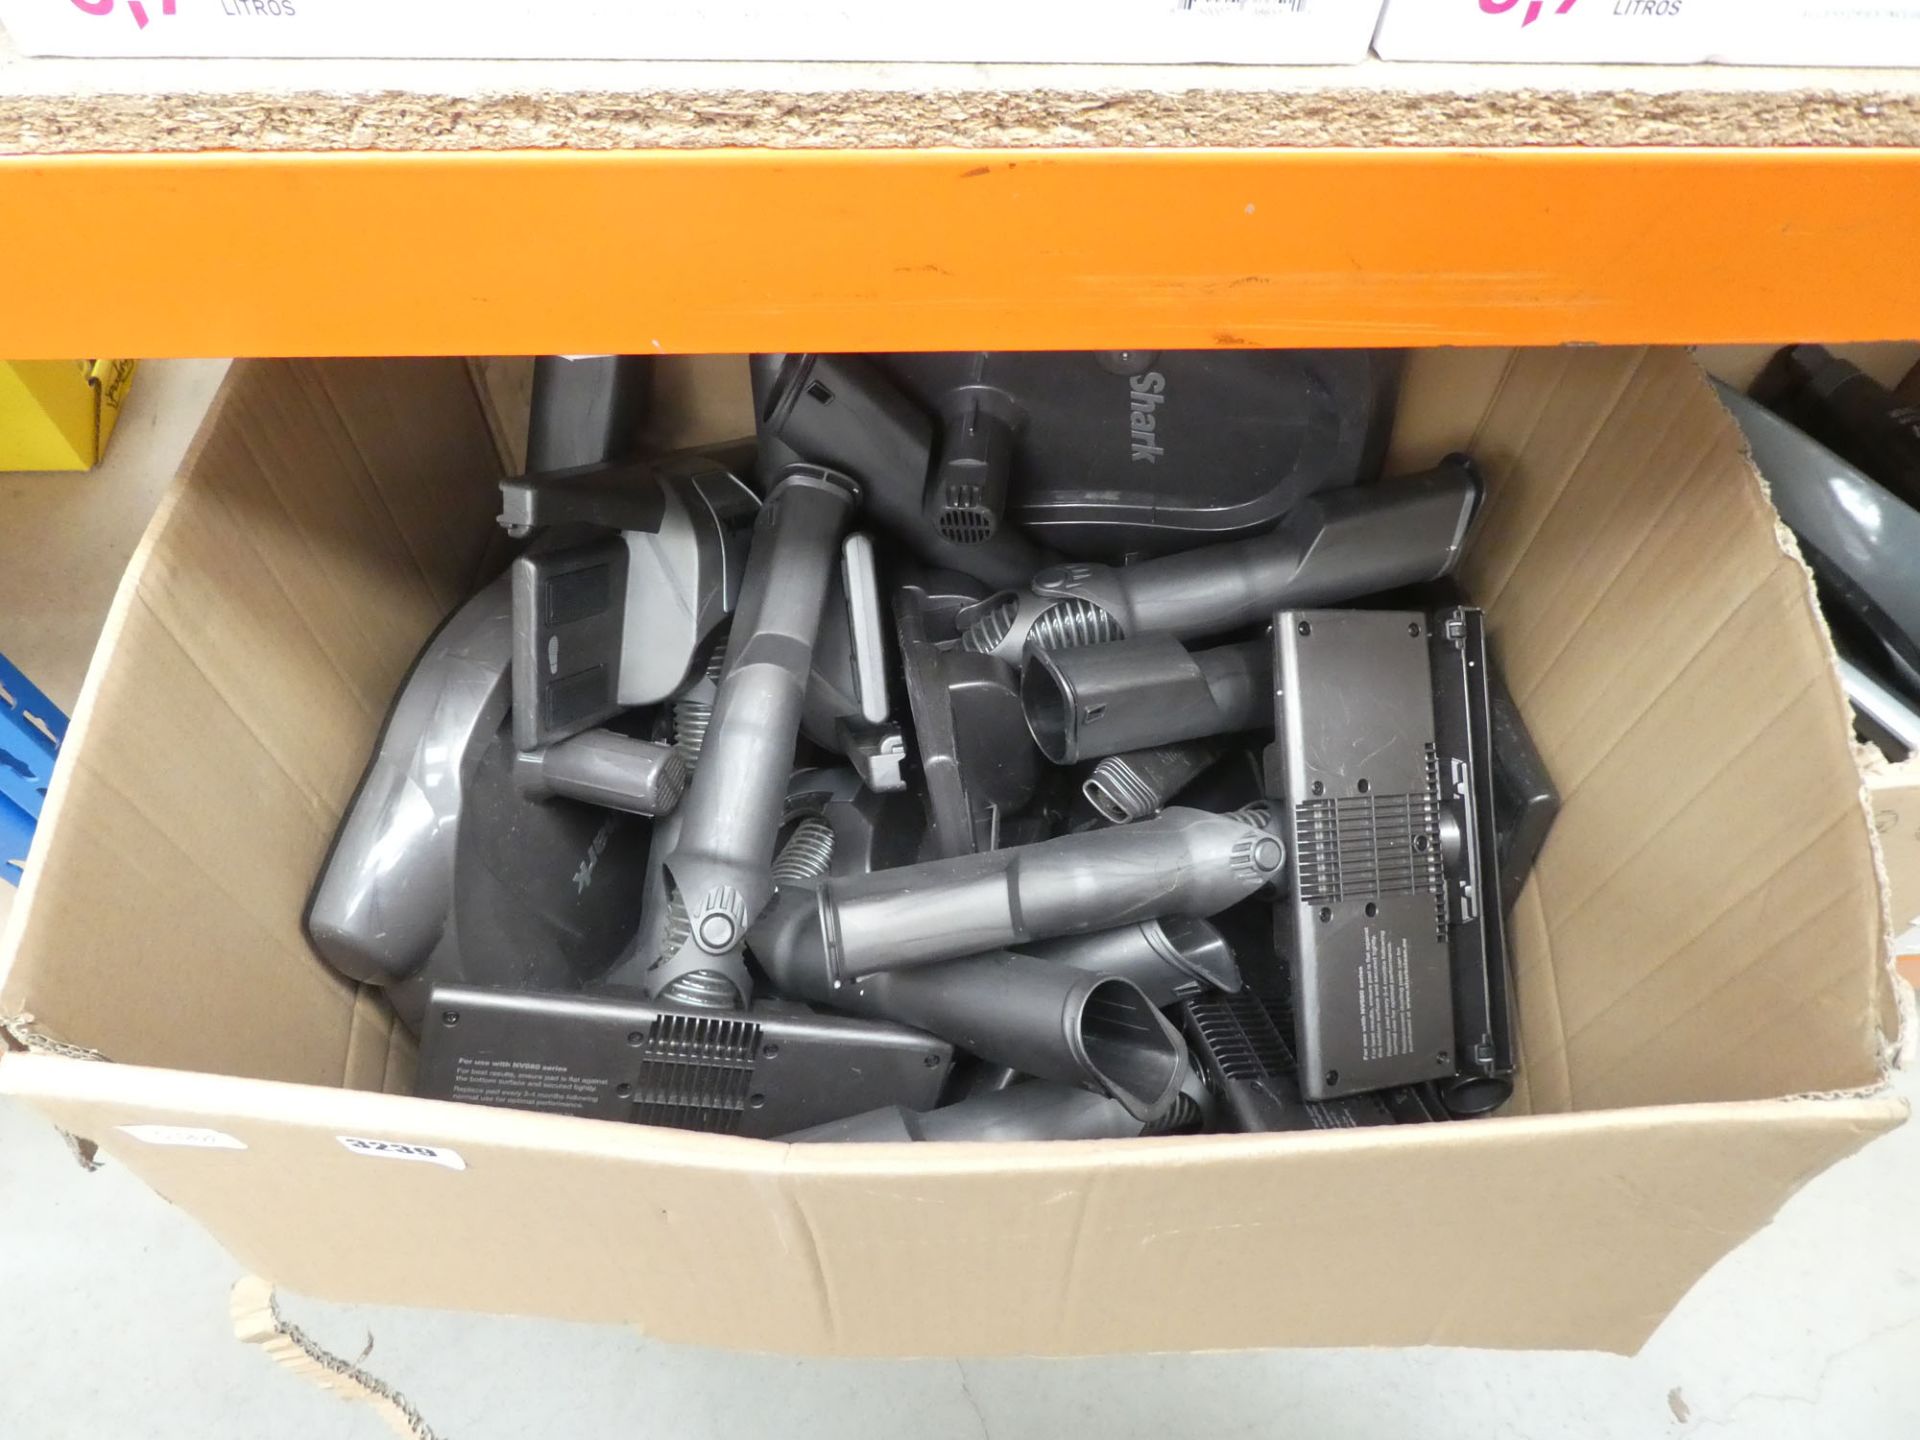 Box of vacuum cleaner attachments